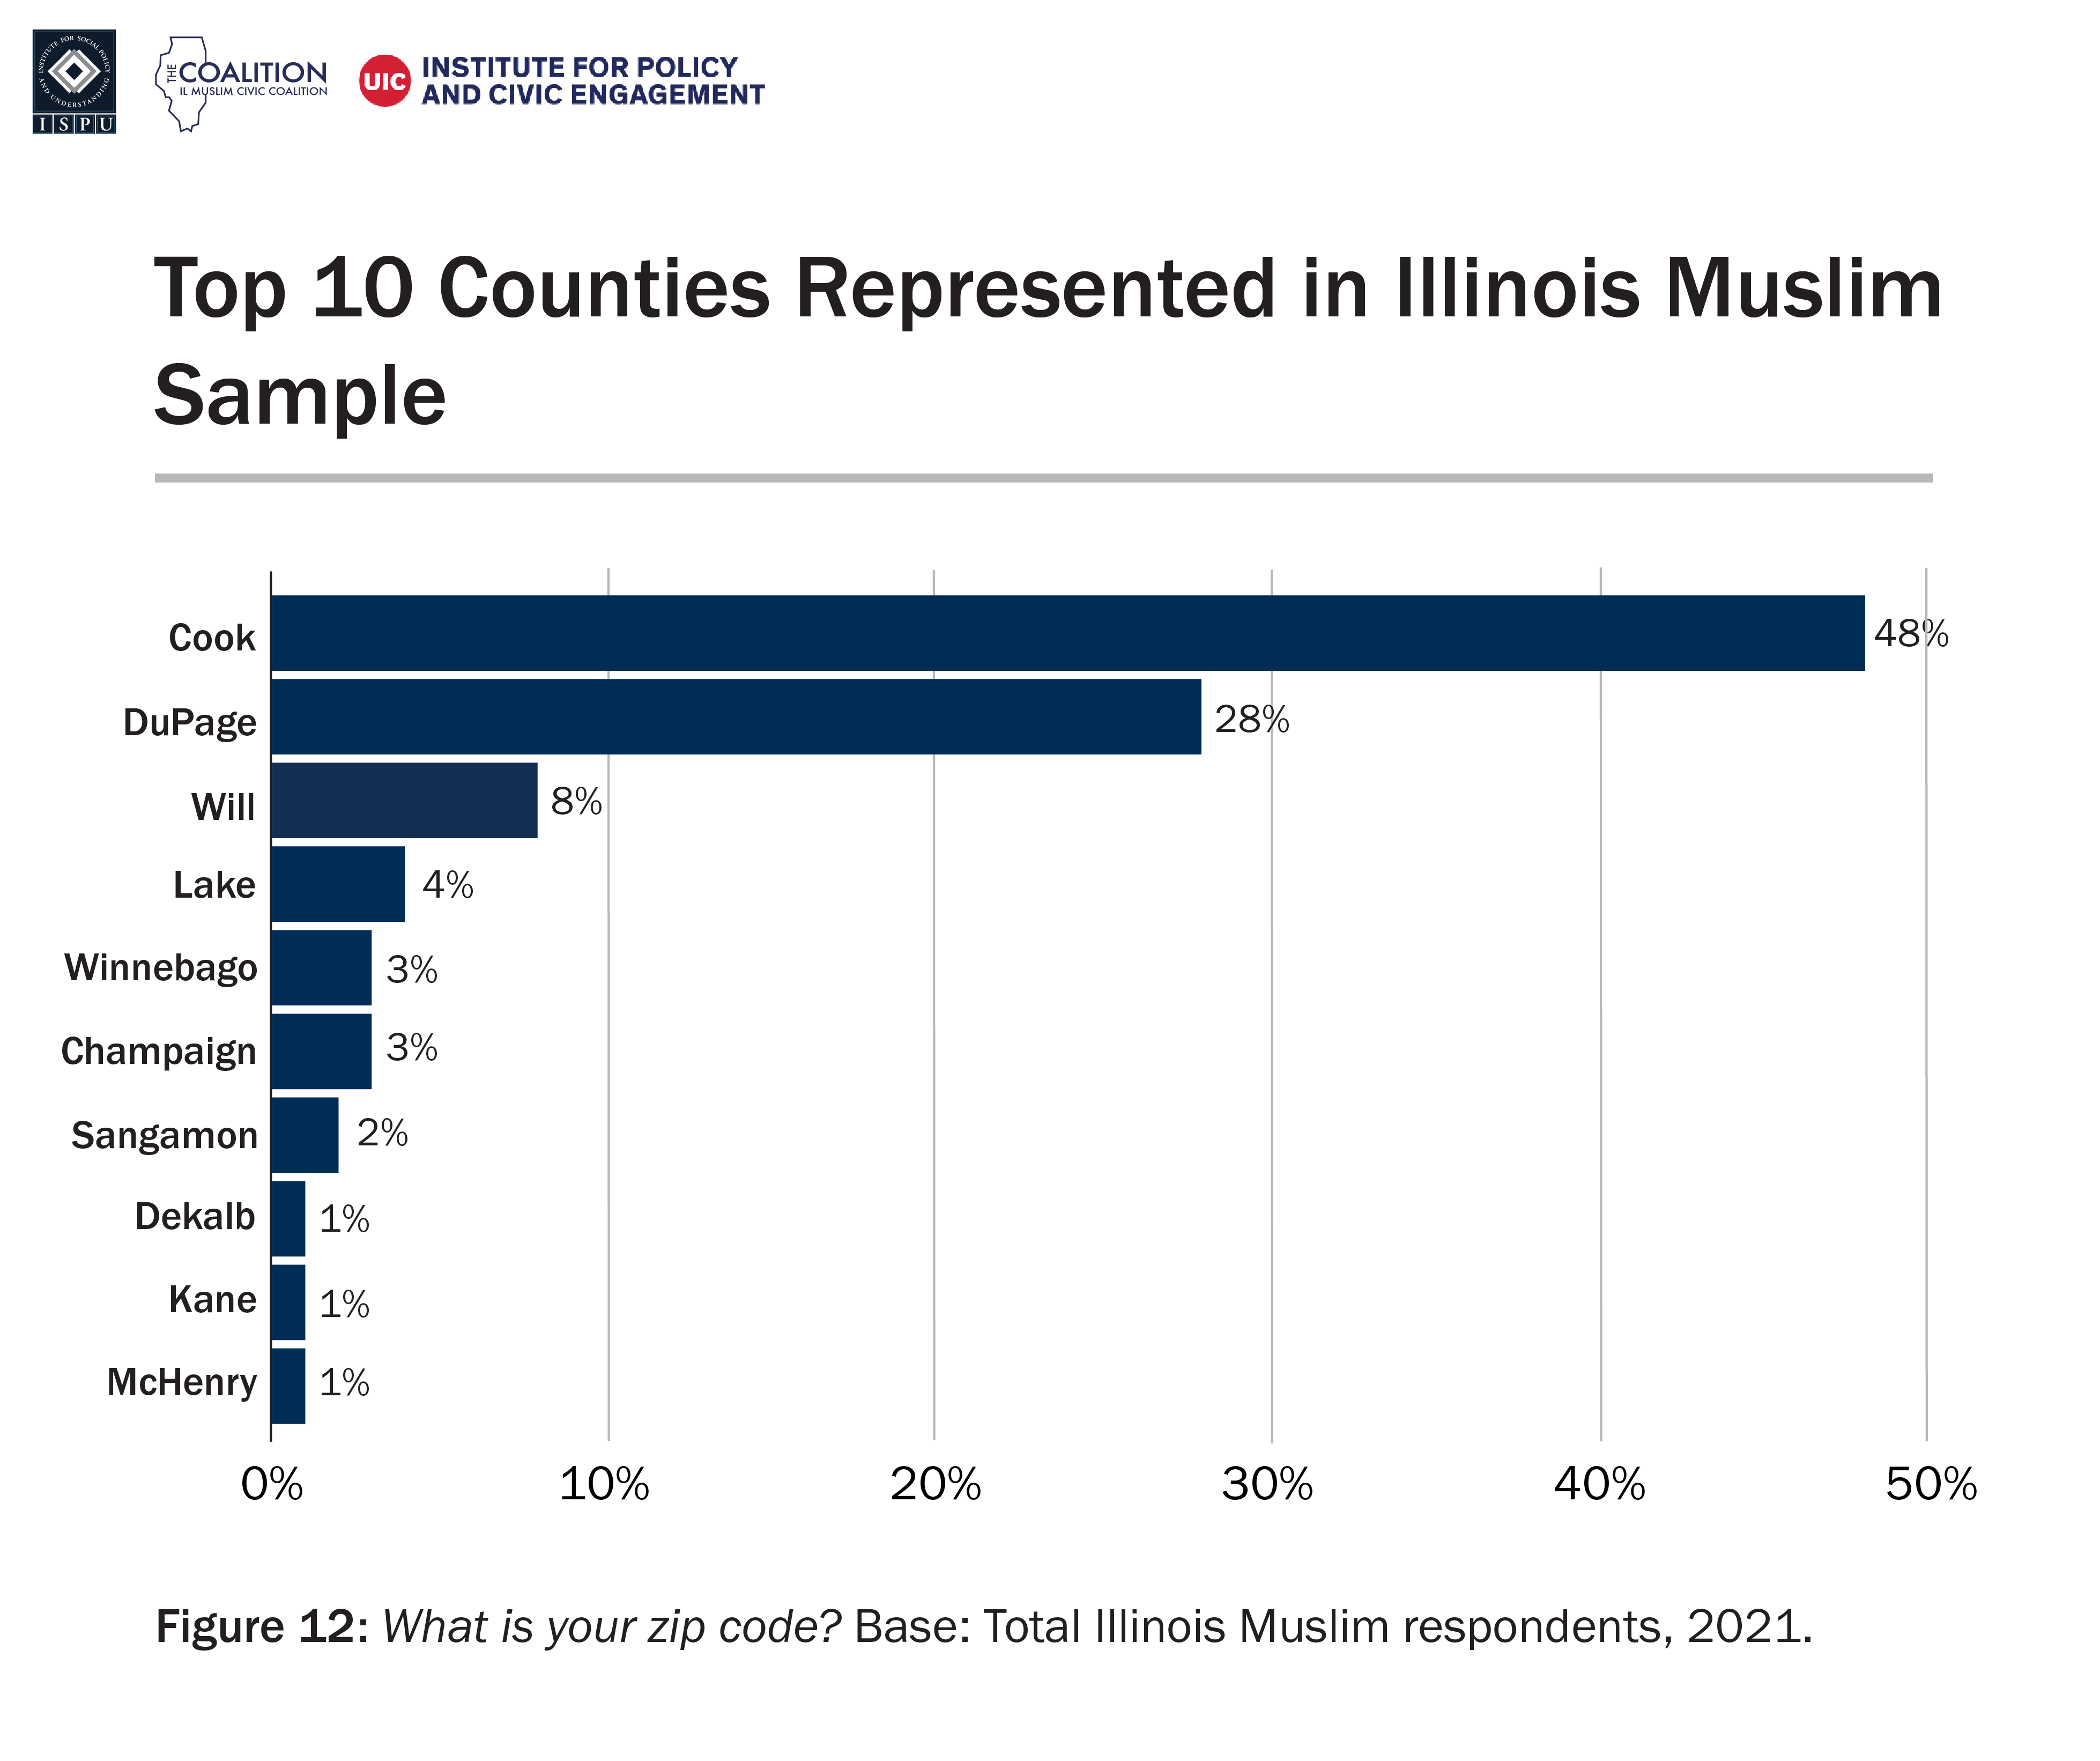 A histogram showing the top 10 counties represented in the Illinois Muslim sample